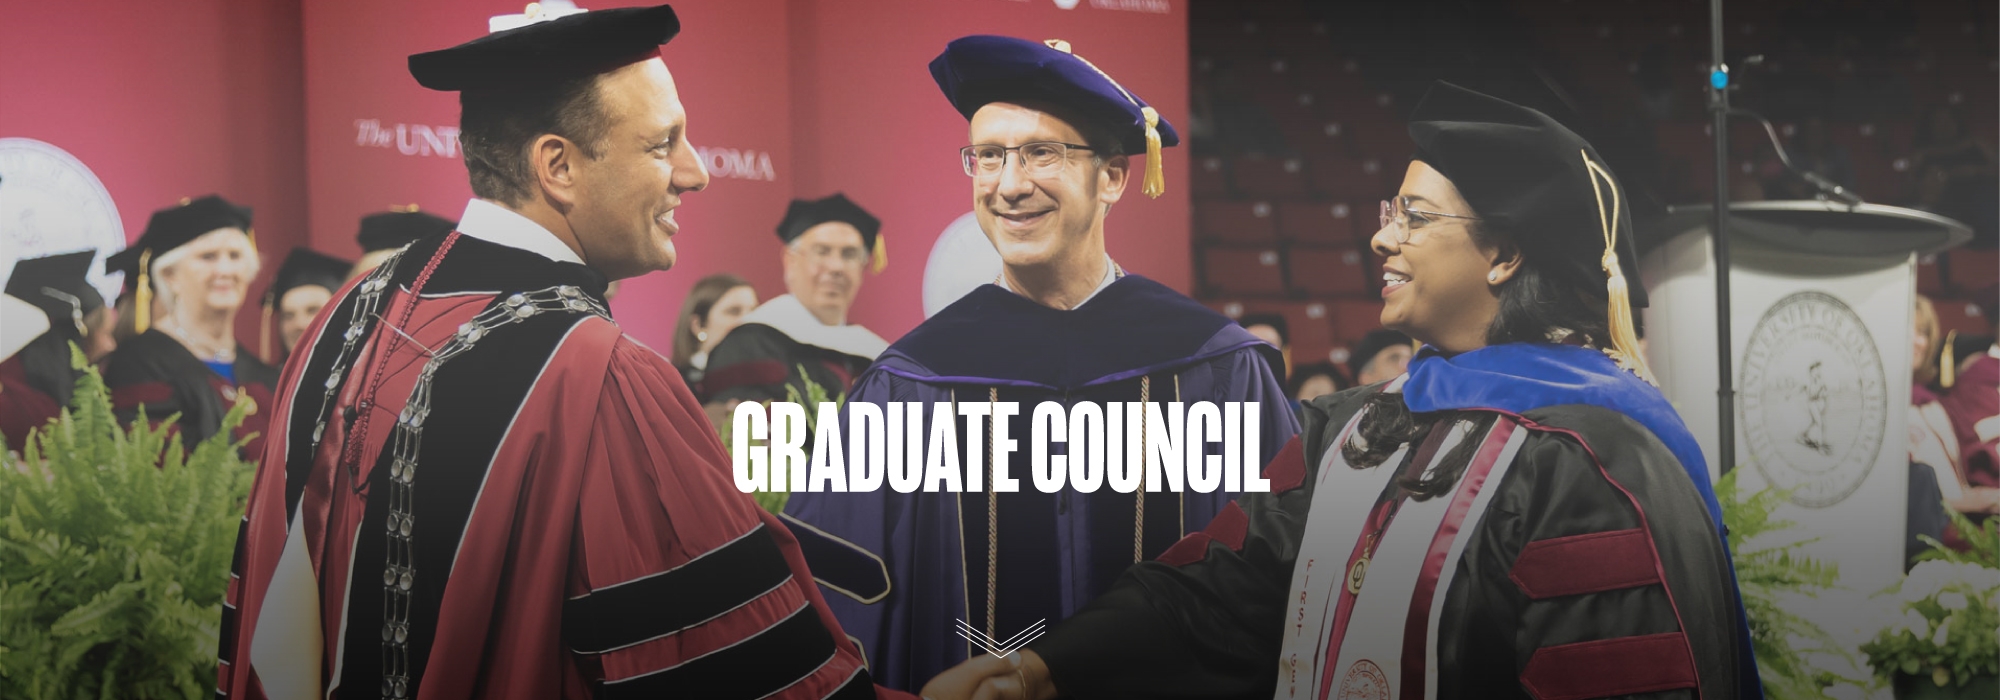 Dean hewes standing beside president harroz shaking the hand of a recent doctoral graduate